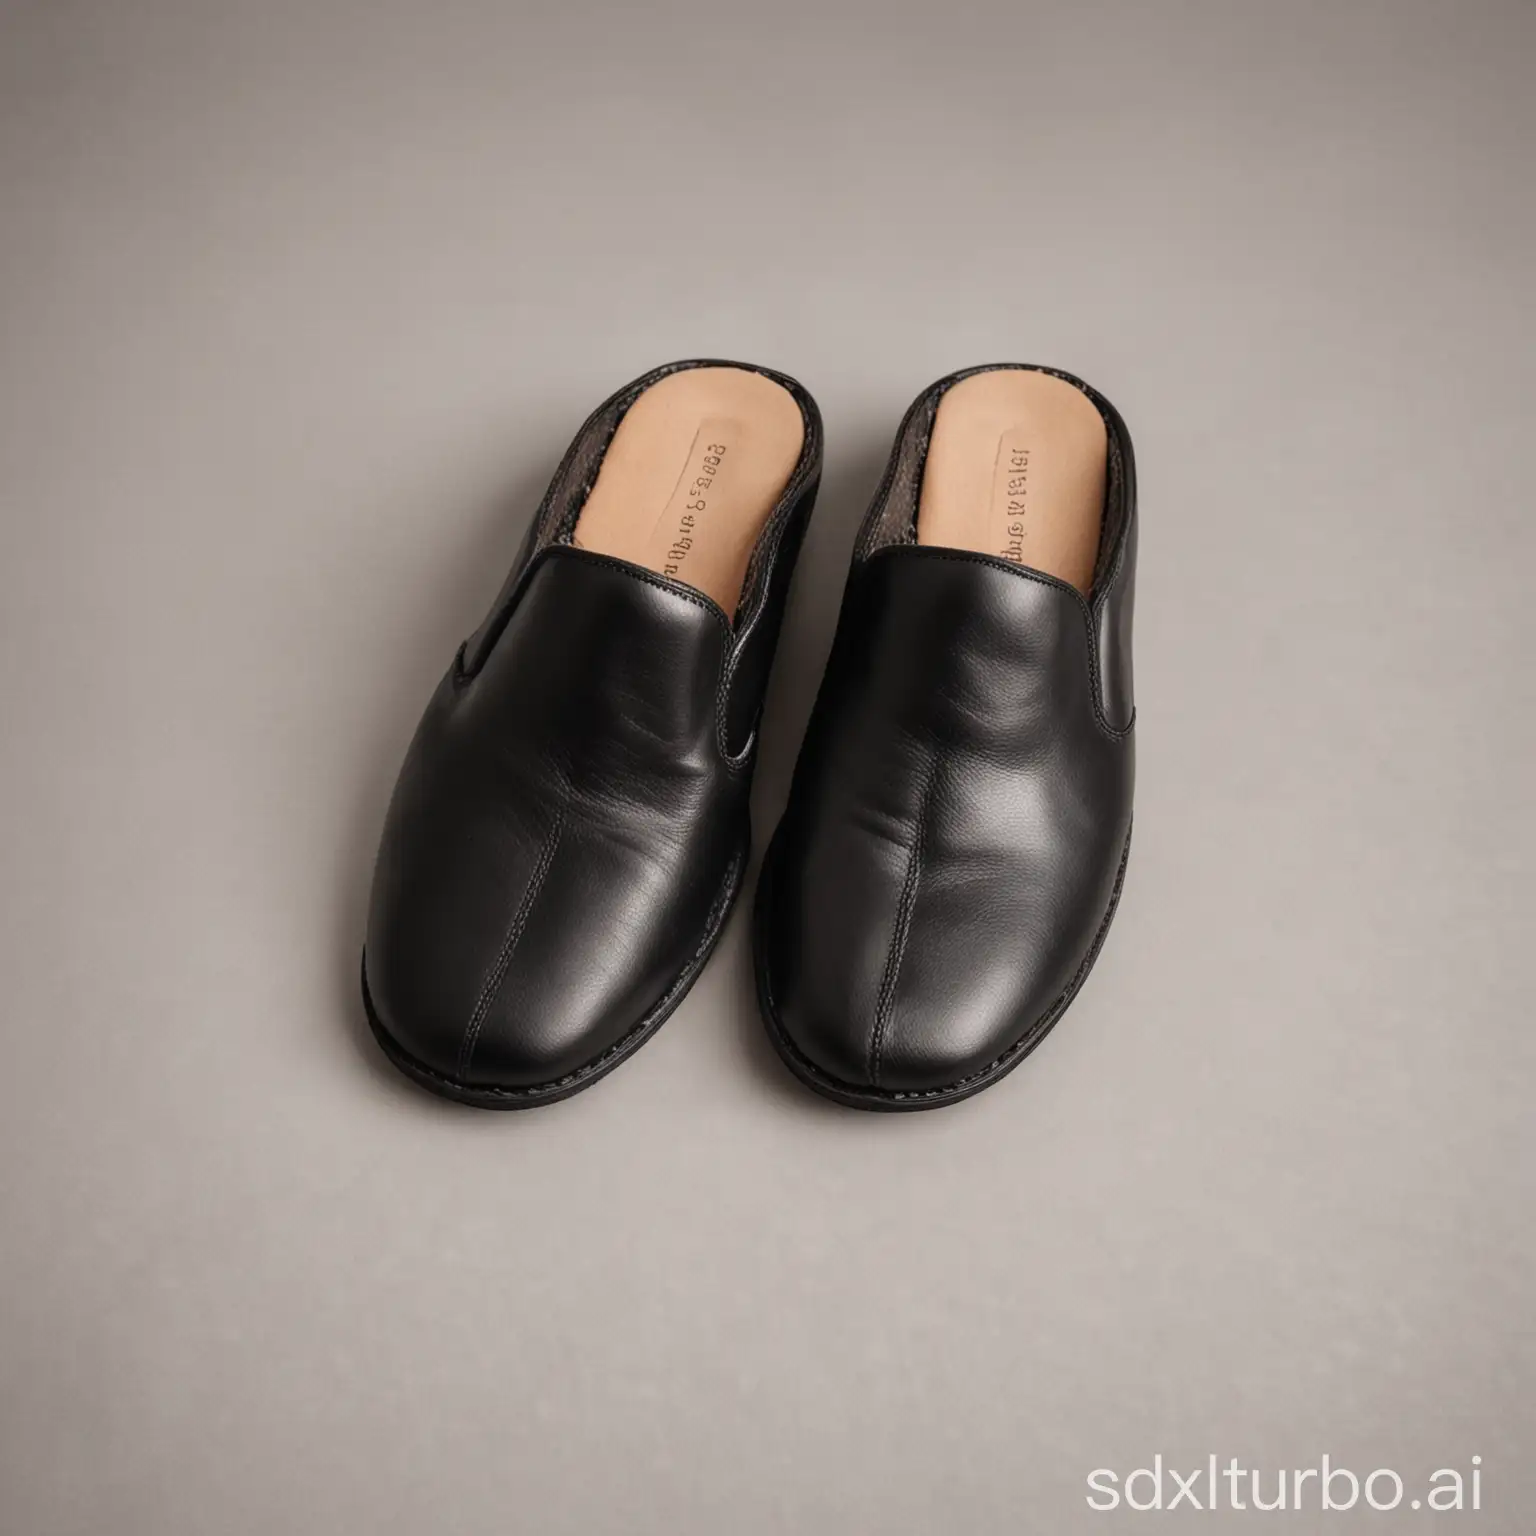 A pair of black leather slippers sit on a white background. The slippers have a sleek, modern design with a cushioned soul and a padded insole.